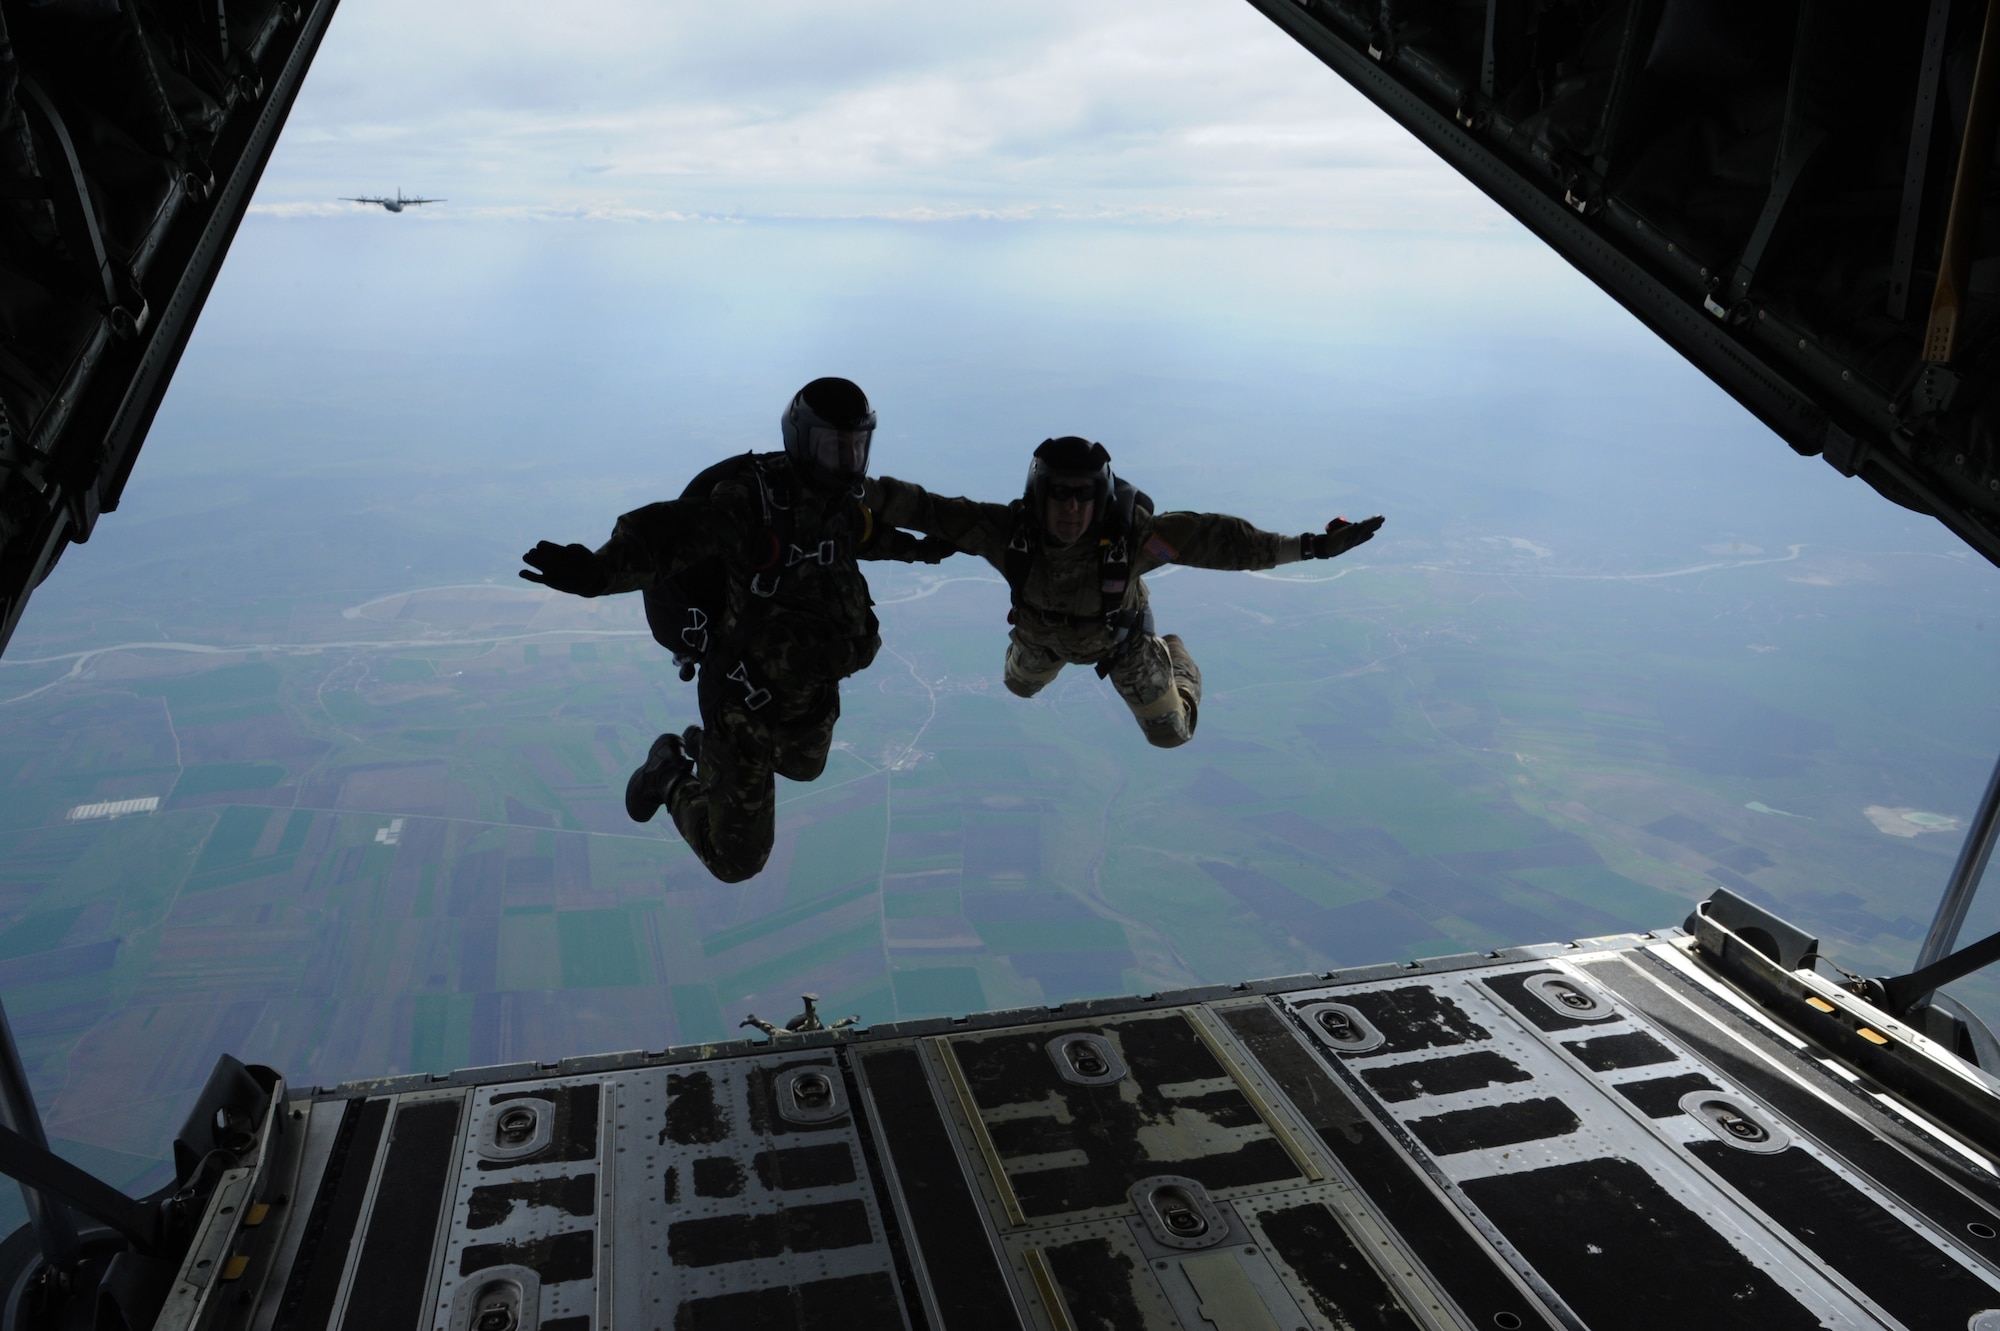 A Romanian and Air Force paratrooper jump out of the back end of a C-130J Super Hercules during Exercise Carpathian Spring, April 16, 2013, Bucharest, Romania. The exercise was designed for aircrew to receive upgrade training as well as building partnership capacity with Romanians. (U.S. Air Force photo/Airman 1st Class Hailey Haux)